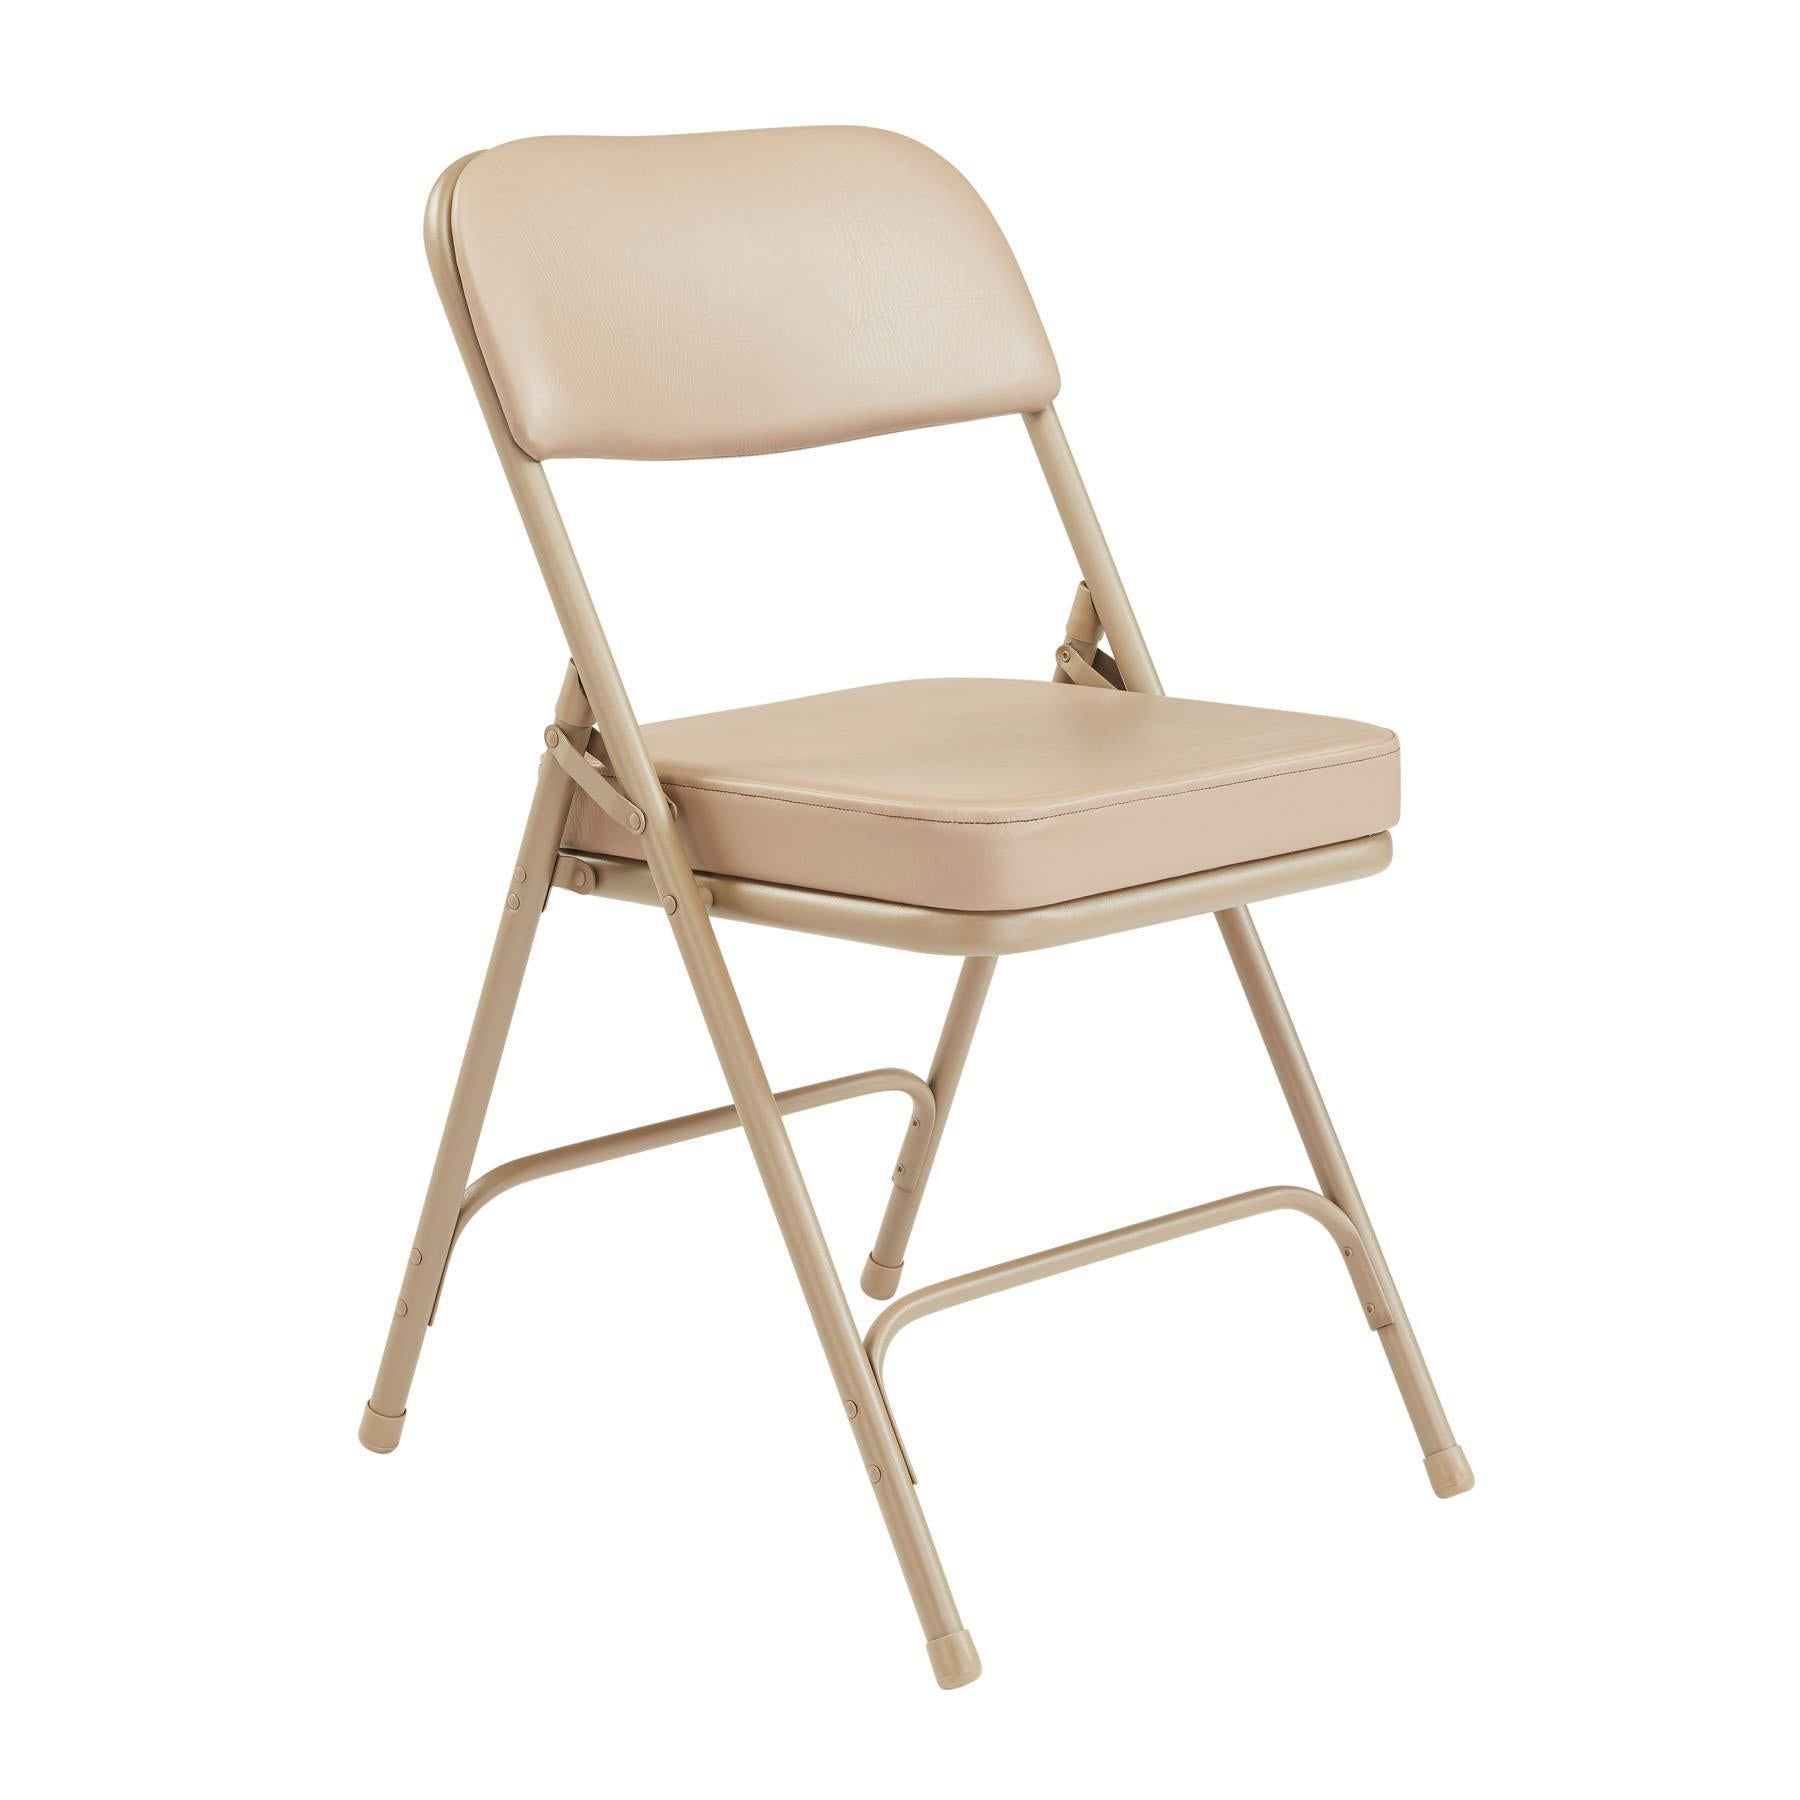 Premium 2" Upholstered Double Hinge Folding Chair (Carton of 2)-Chairs-Beige Vinyl/Beige Frame-